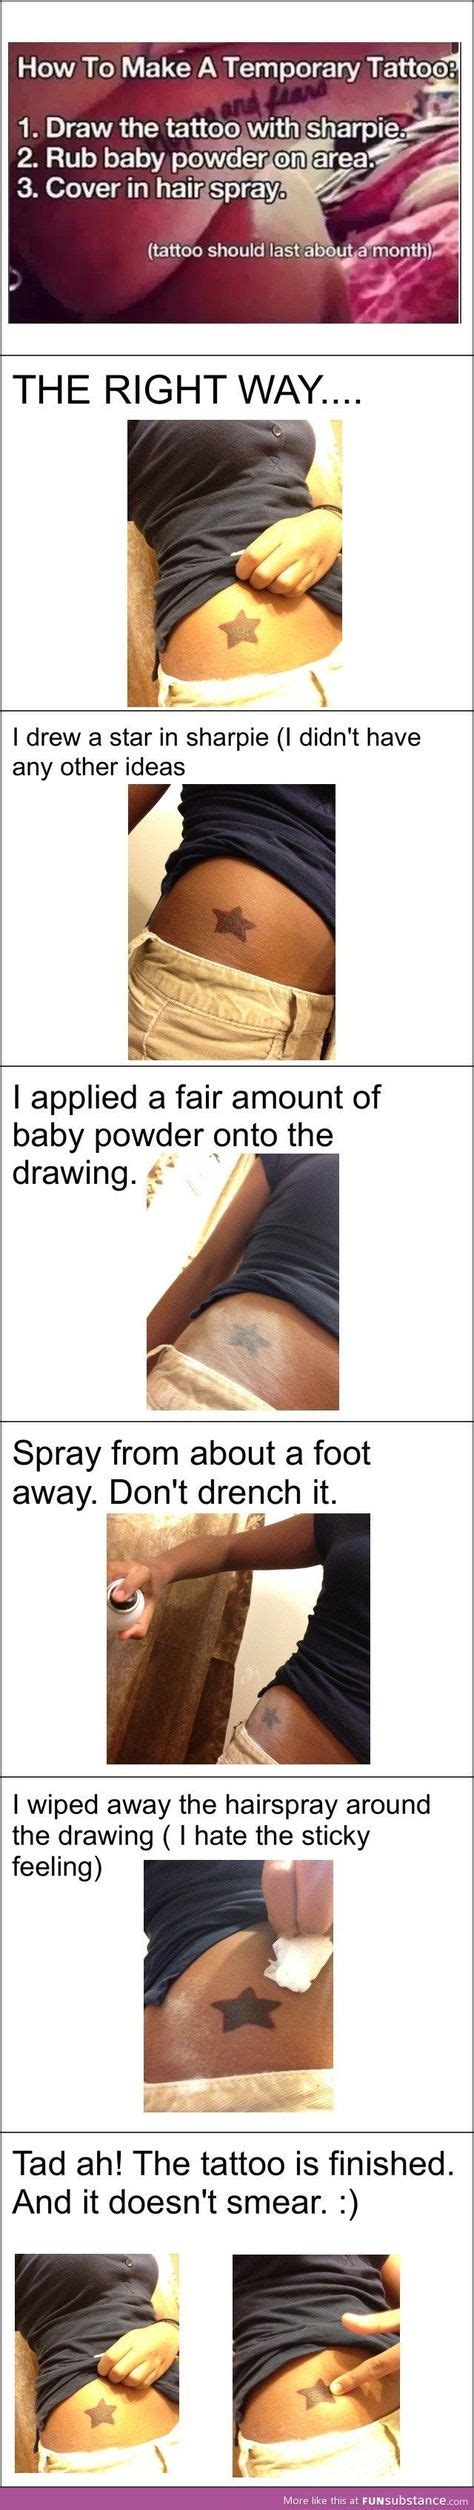 You can easily make a fake tattoo with a sharpie pen and a few other supplies found around your house. DIY Temporary Tattoo | Diy temporary tattoos, Sharpie tattoos